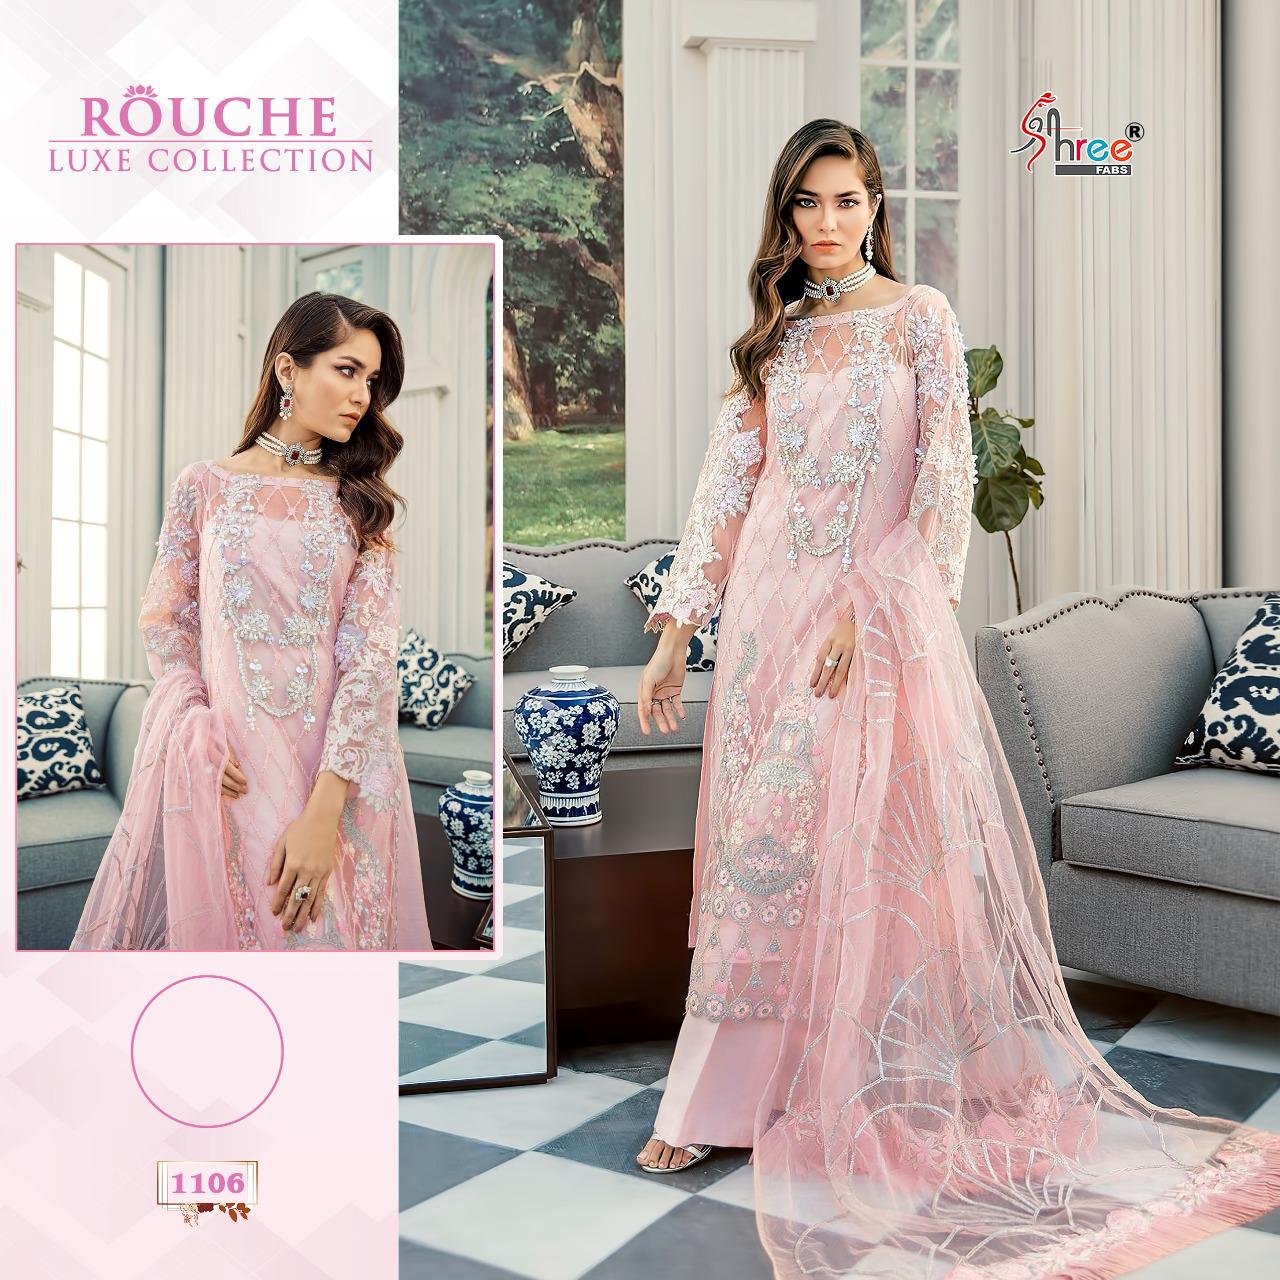 SHREE FABS ROUCHE LUXE 1106 PAKISTANI SUITS